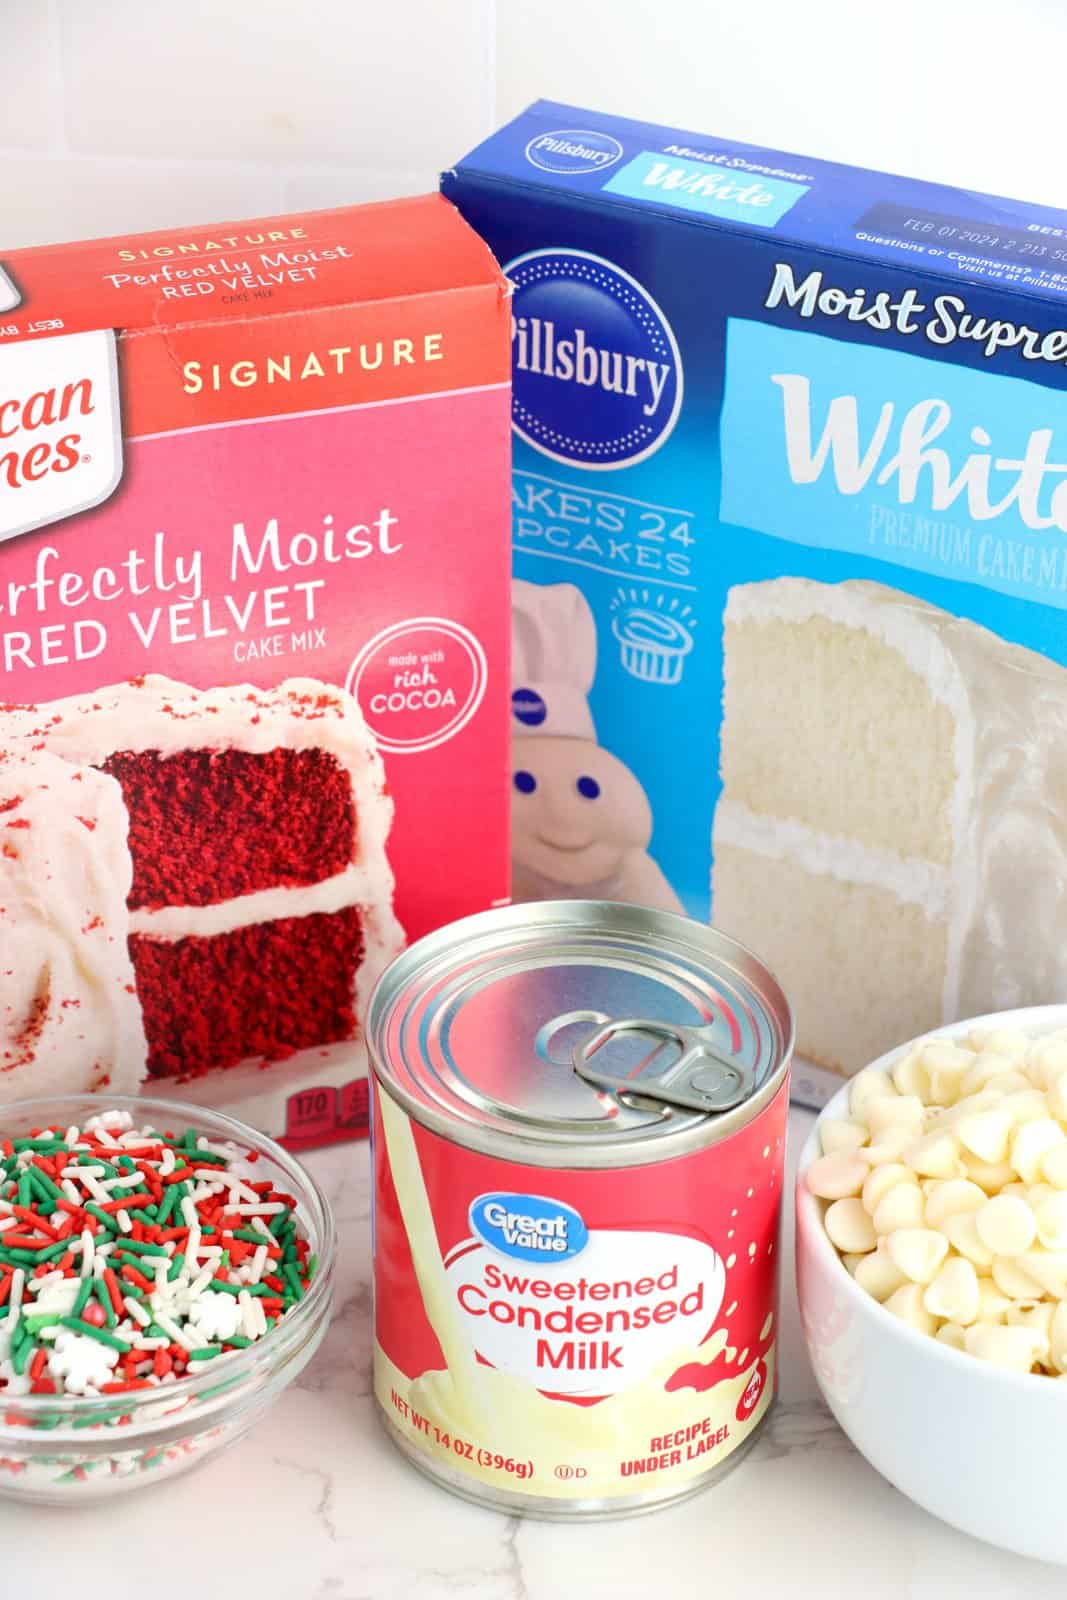 Ingredients needed: white chocolate chips, sweetened condensed milk, red velvet cake mix, white cake mix and sprinkles.